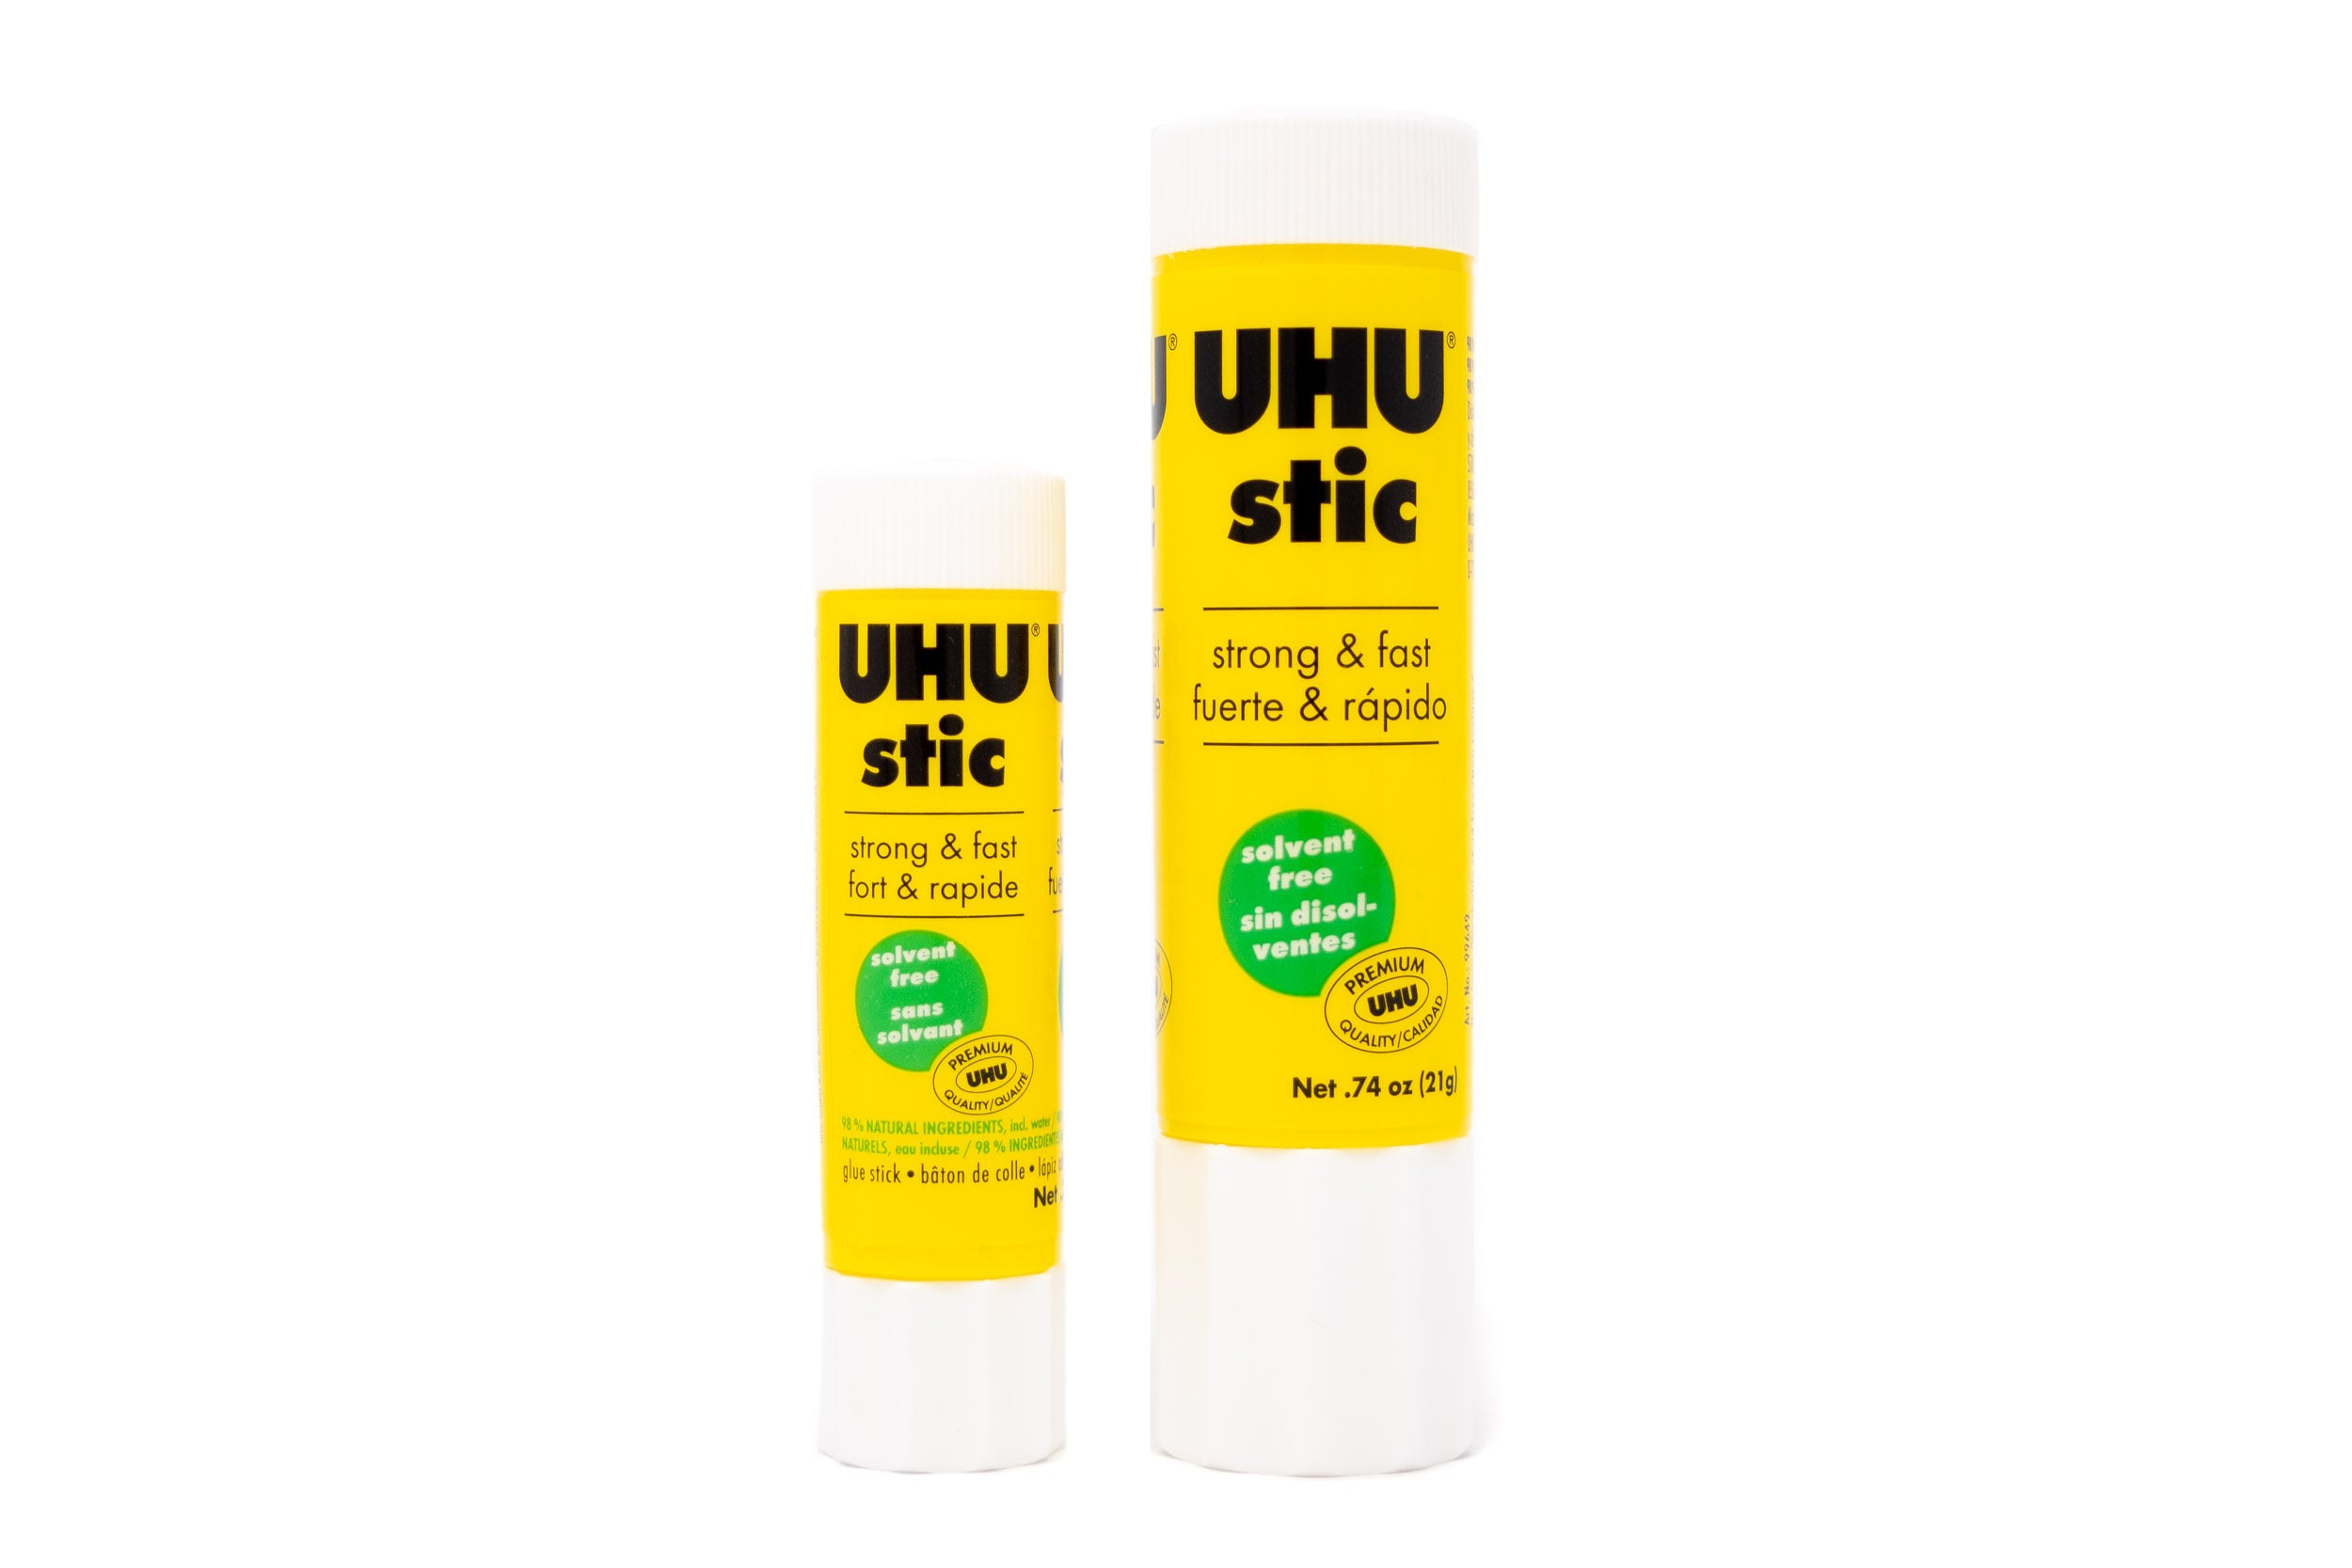  UHU Stic ReNATURE Eco Friendly Solvent Glue Stick in a  Renewable Resource Packaging 4 x 21g : Arts, Crafts & Sewing